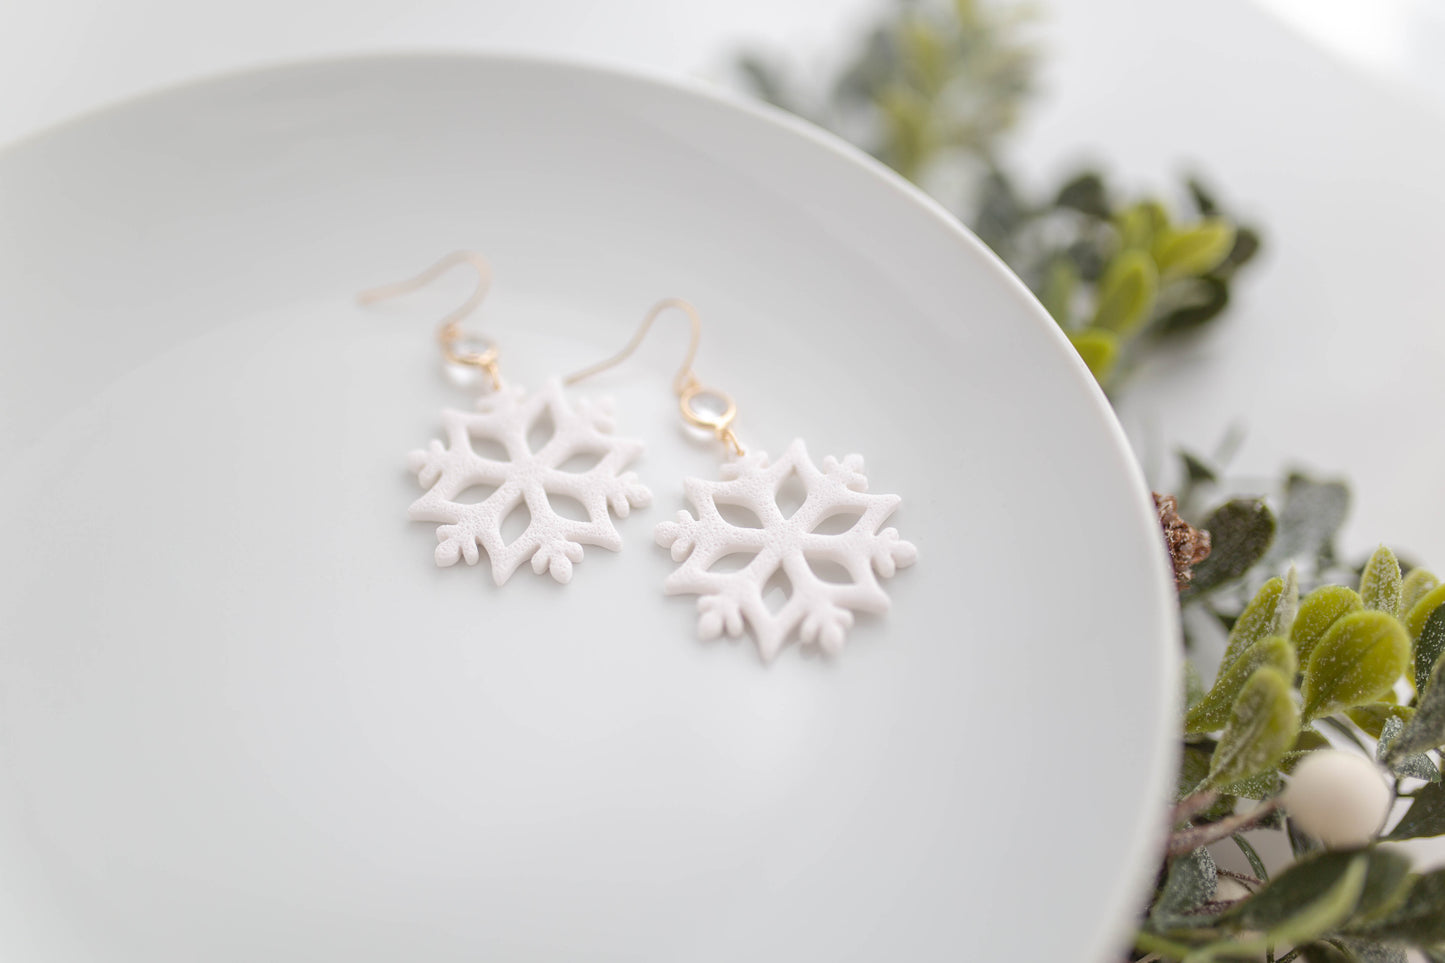 Clay Earrings | Snowflakes | Merry Everything